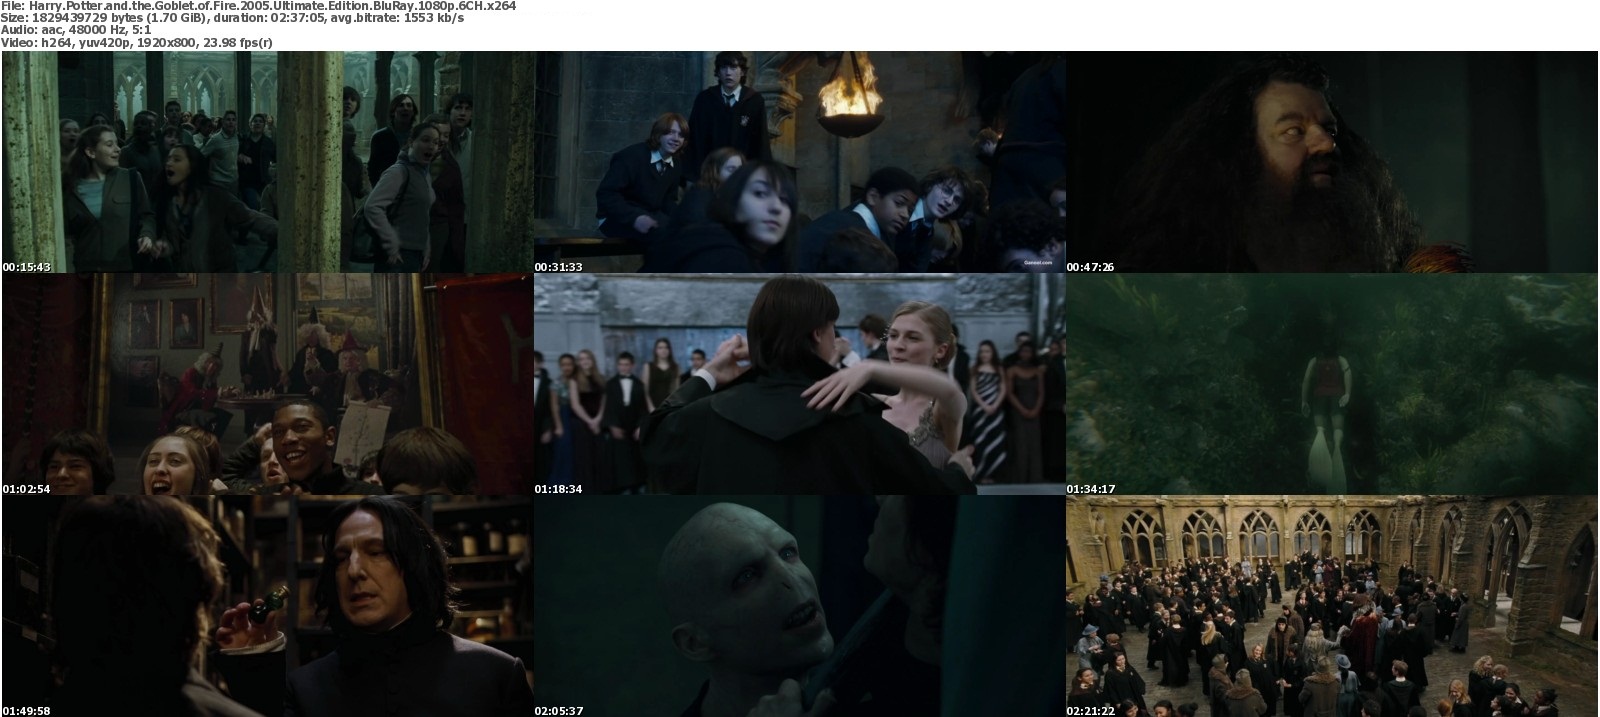 Harry Potter And The Goblet Of Fire Movie Download In Hindi 720p